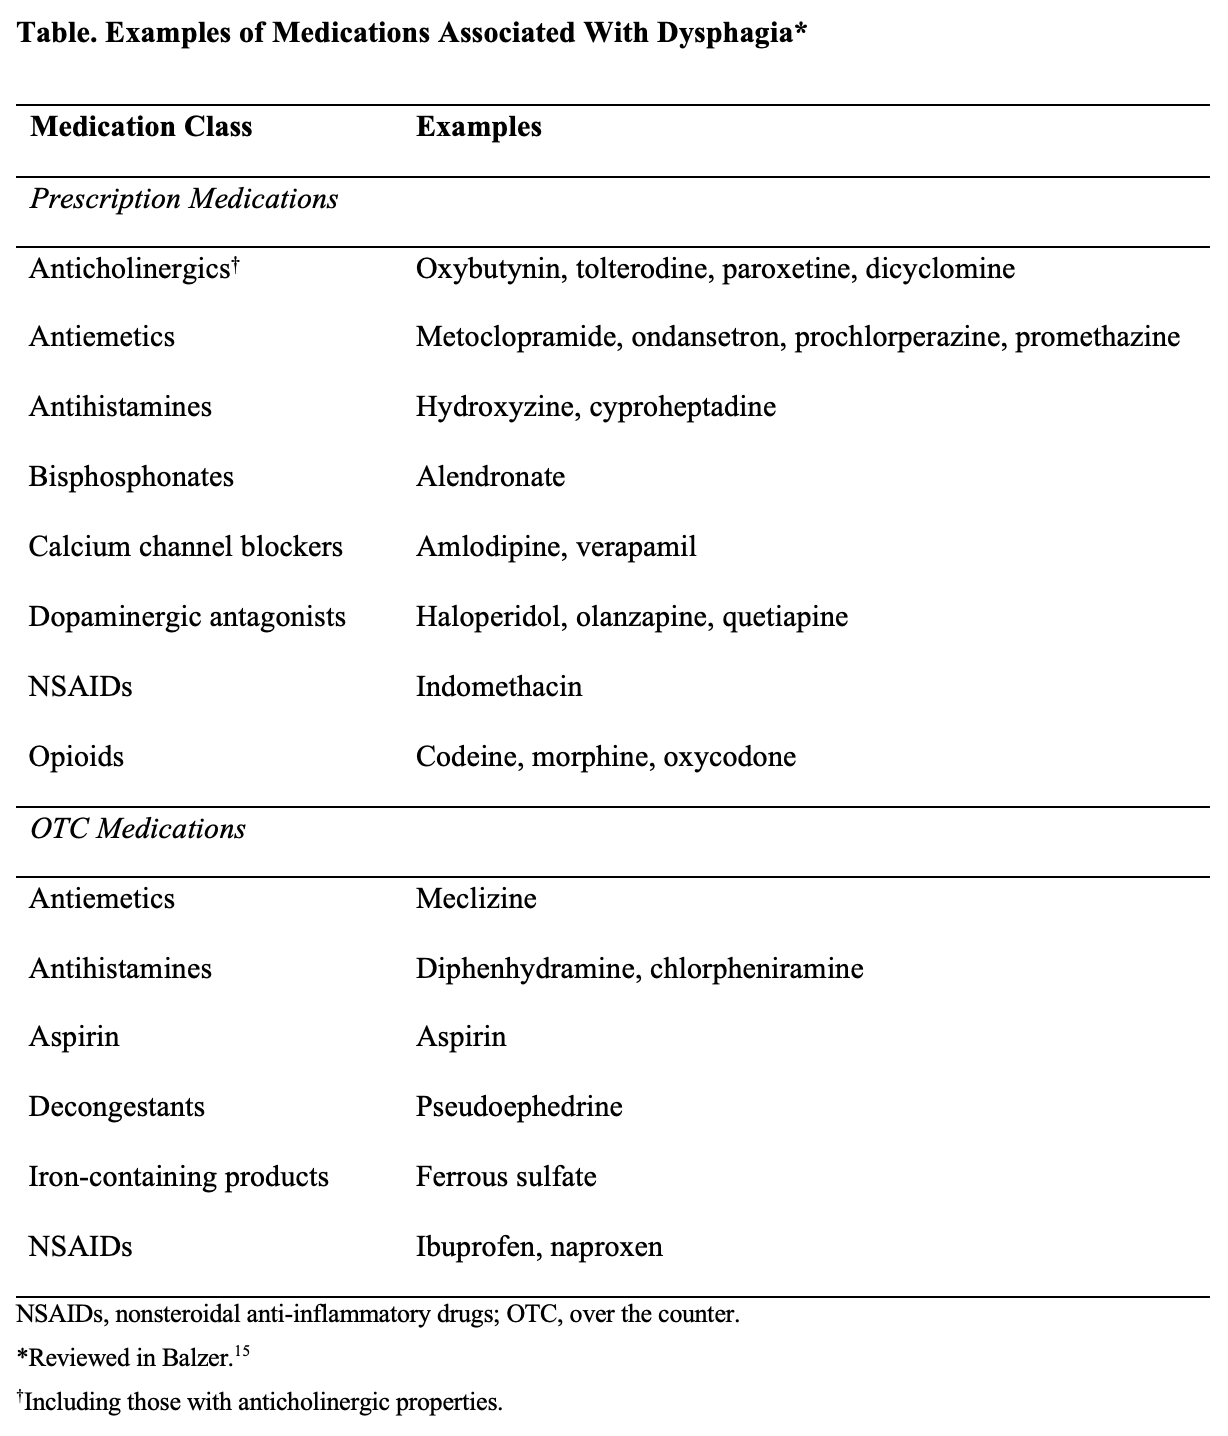 Table. Examples of Medications Associated With Dysphagia15